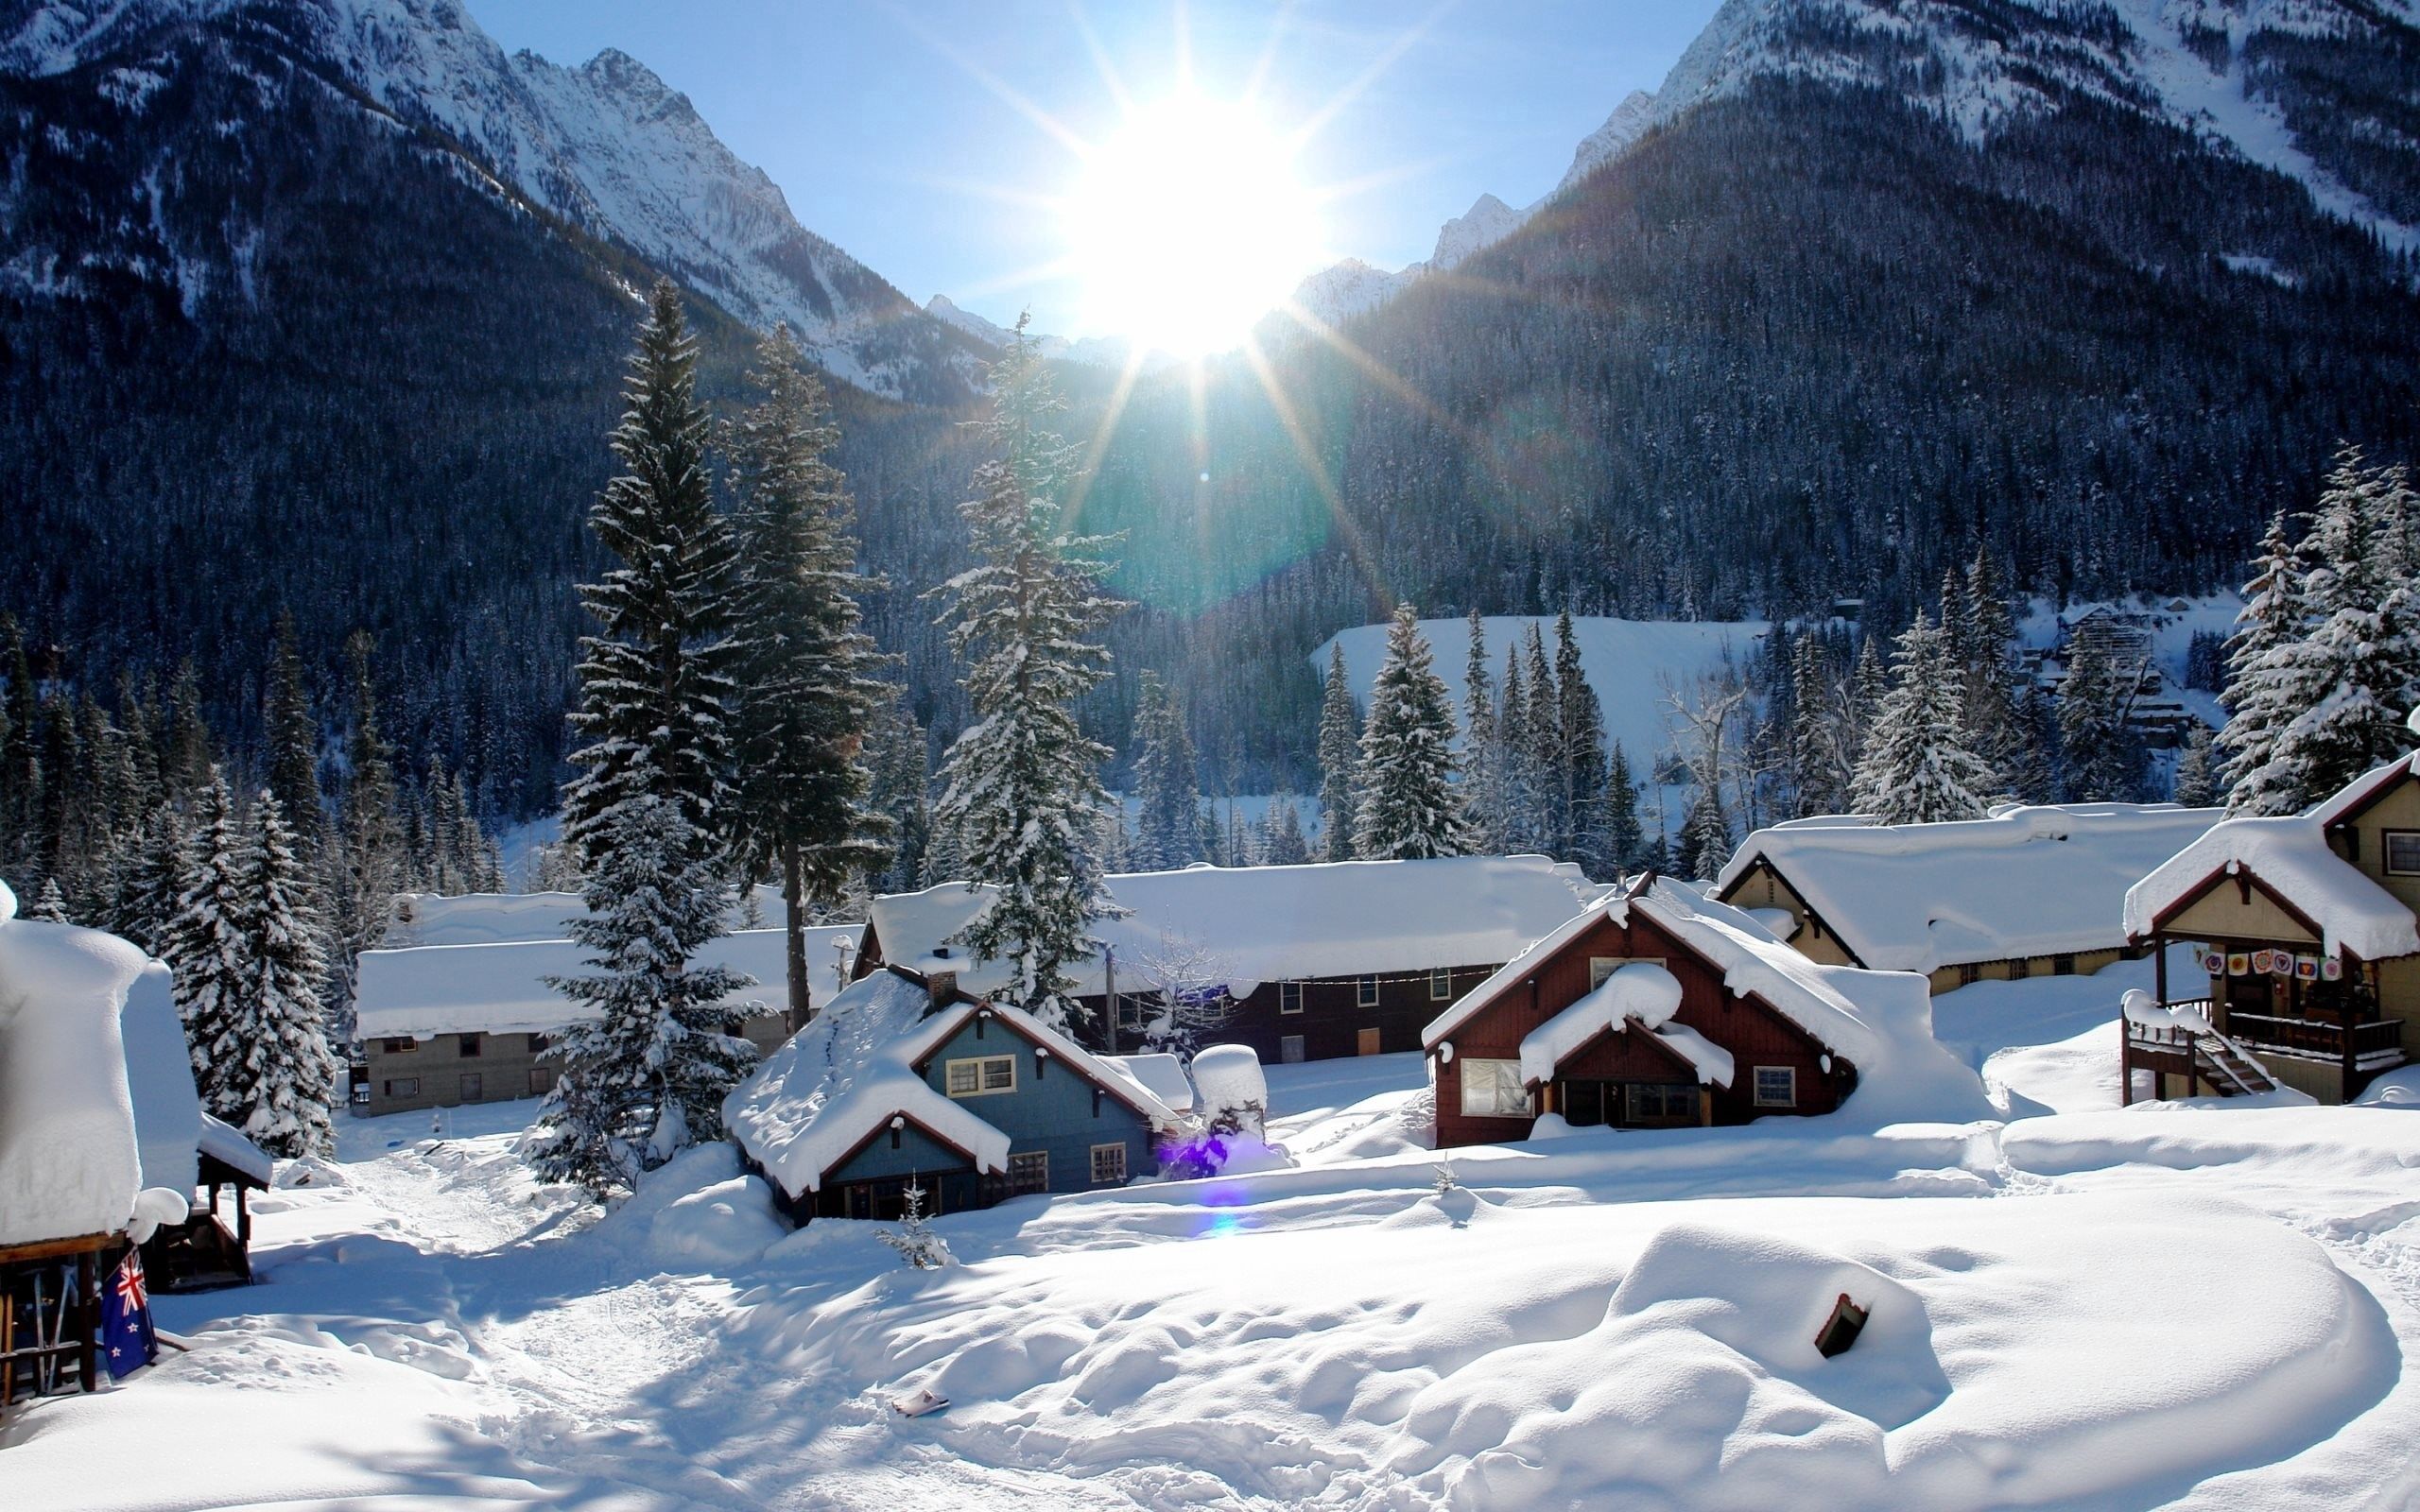 117103 download wallpaper winter, nature, houses, mountains, snow, handsomely, it's beautiful screensavers and pictures for free